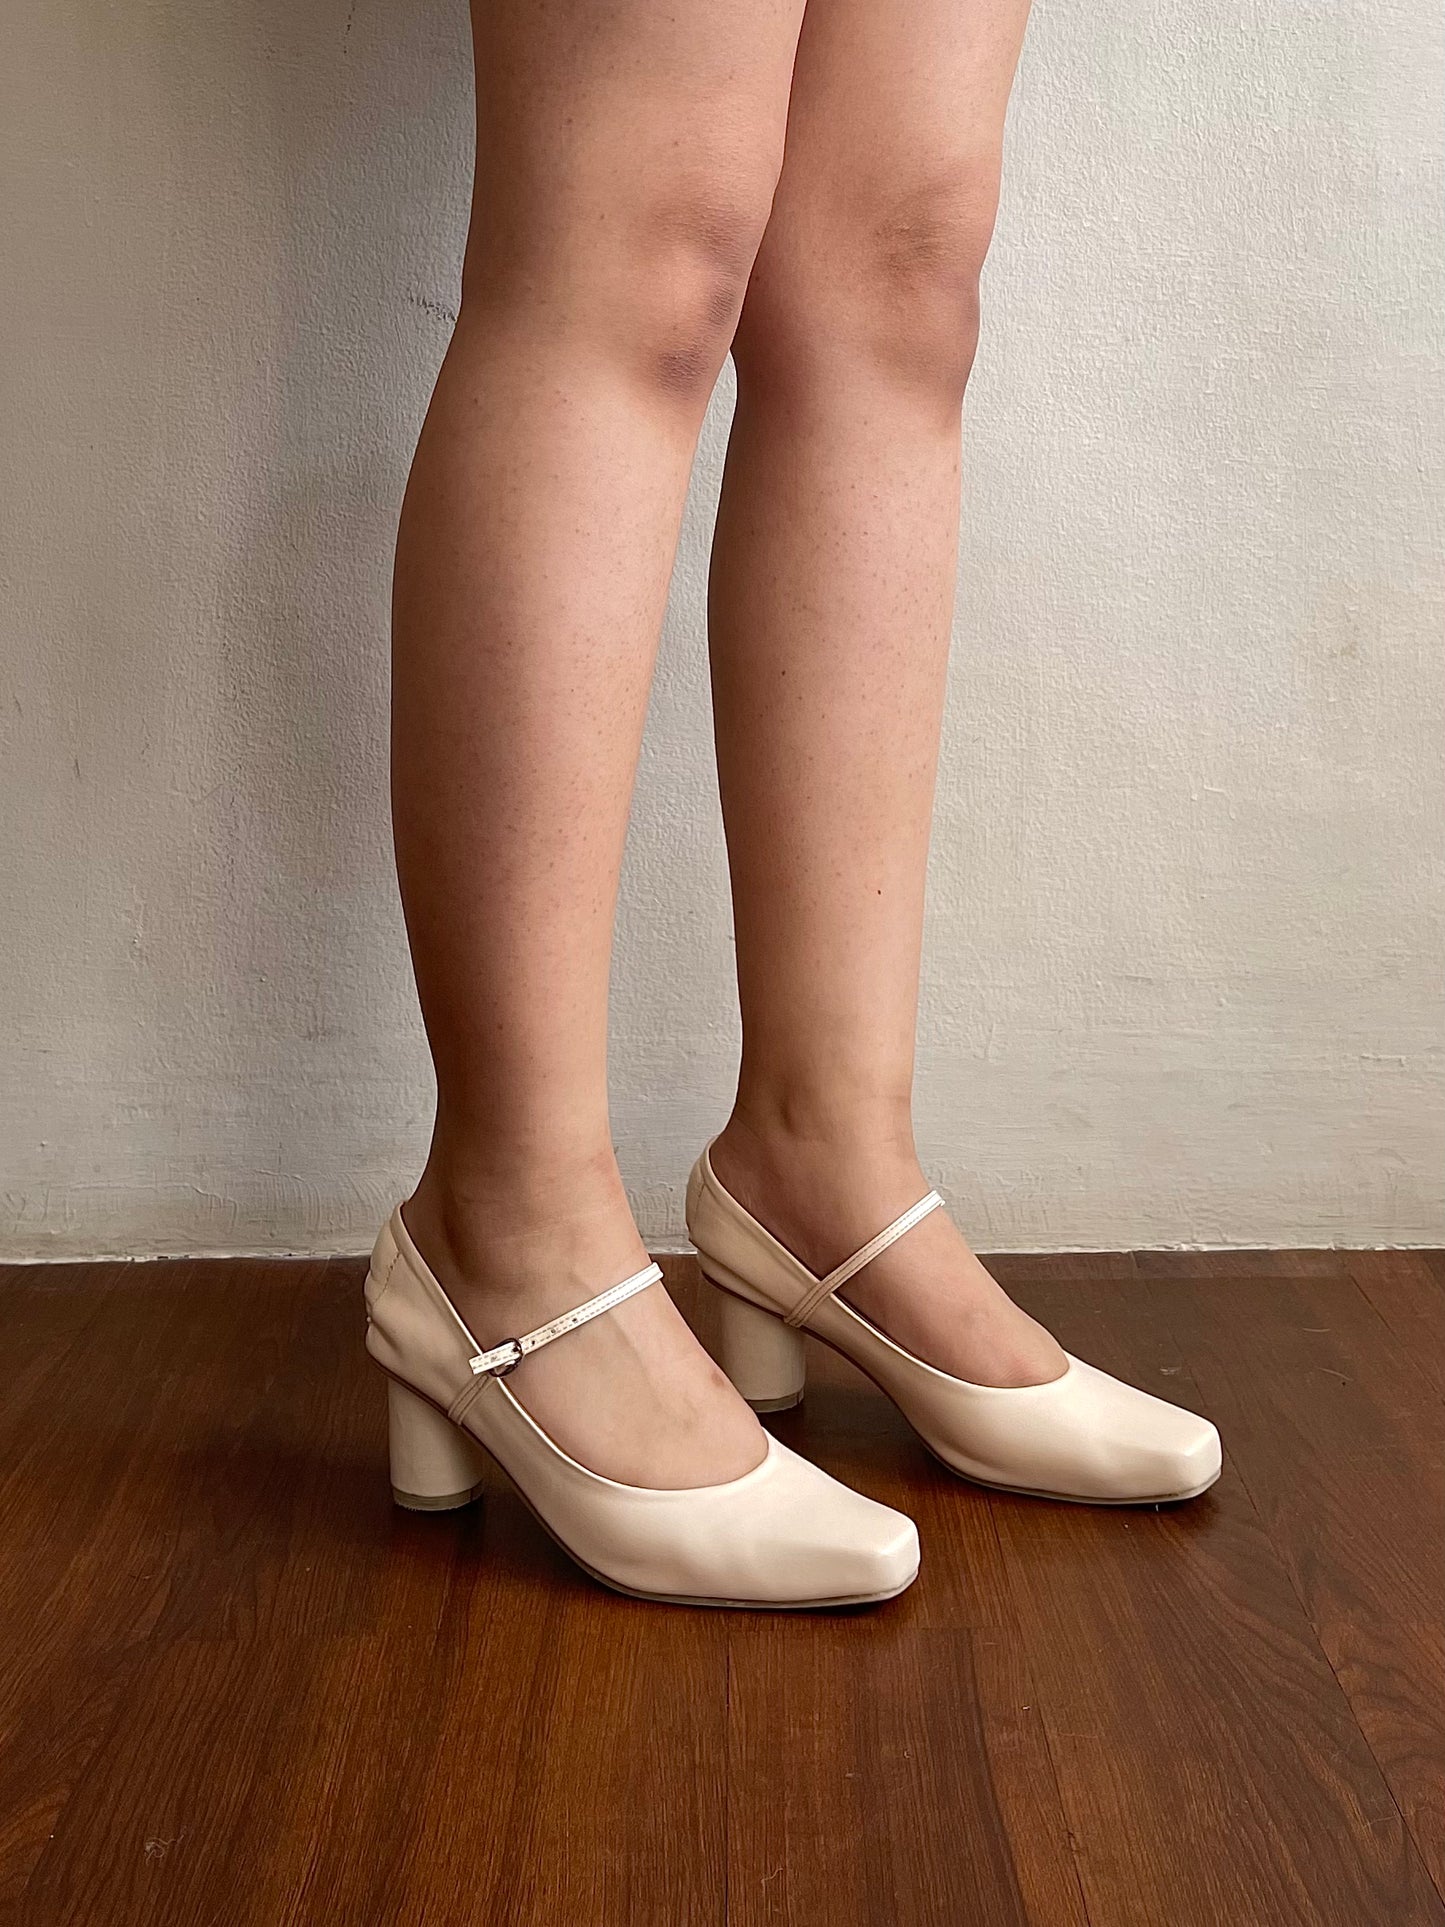 Sample 020: Mary Janes Pumps in Cream - Size 6